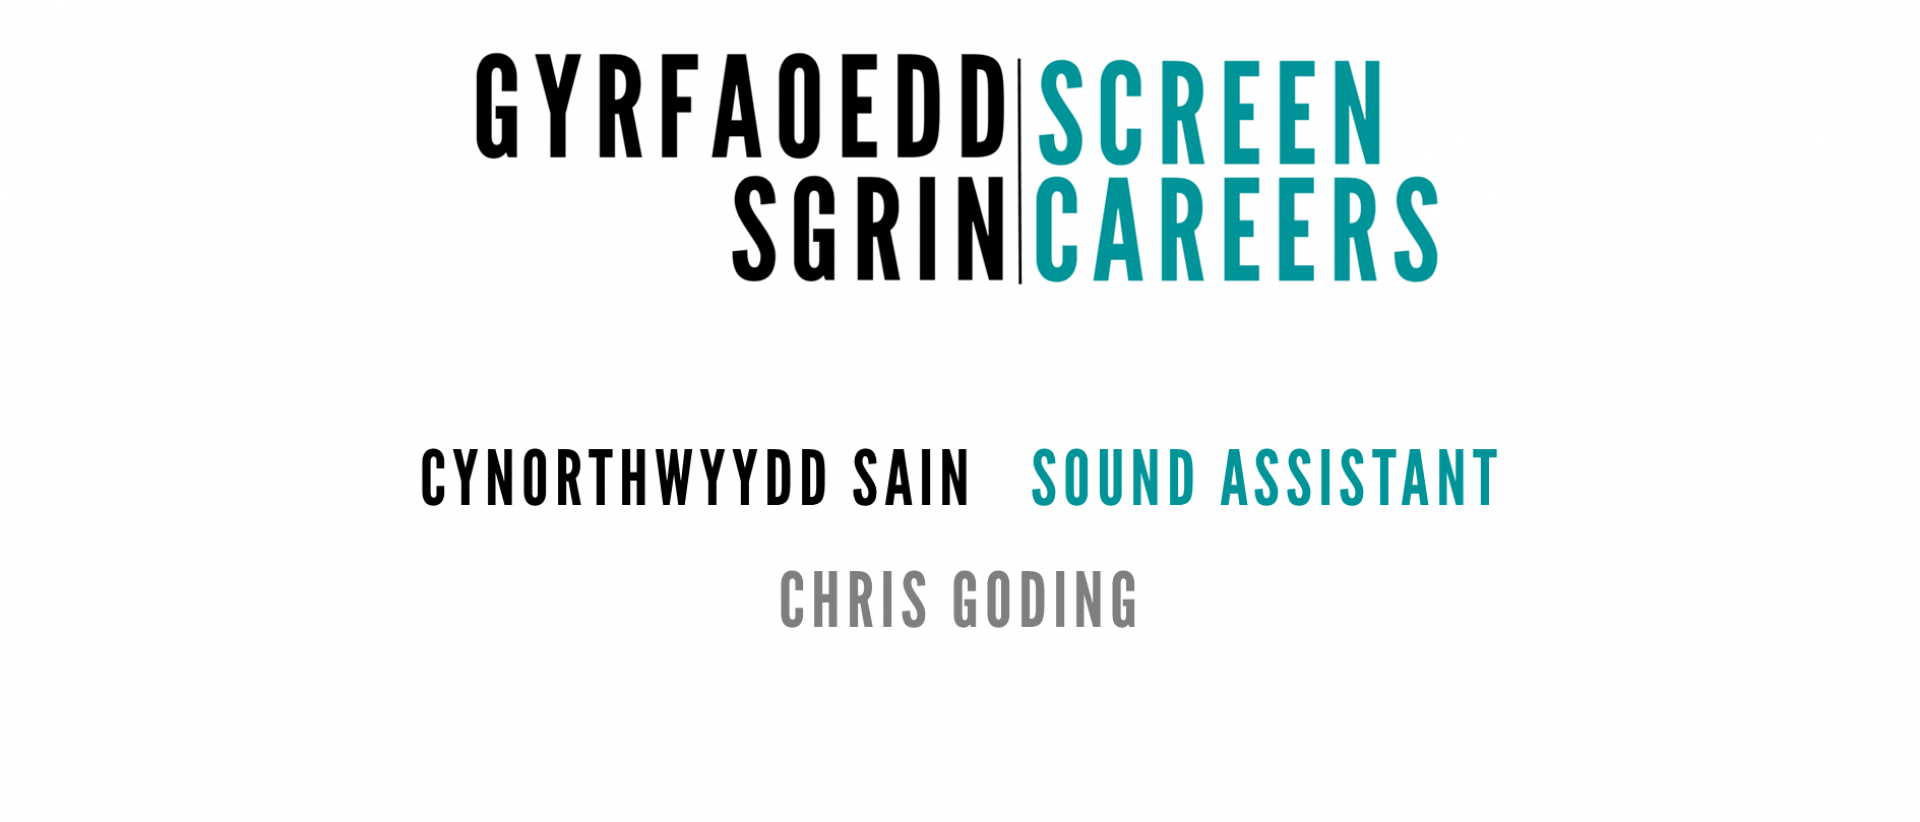 screen careers logo and sound assistant